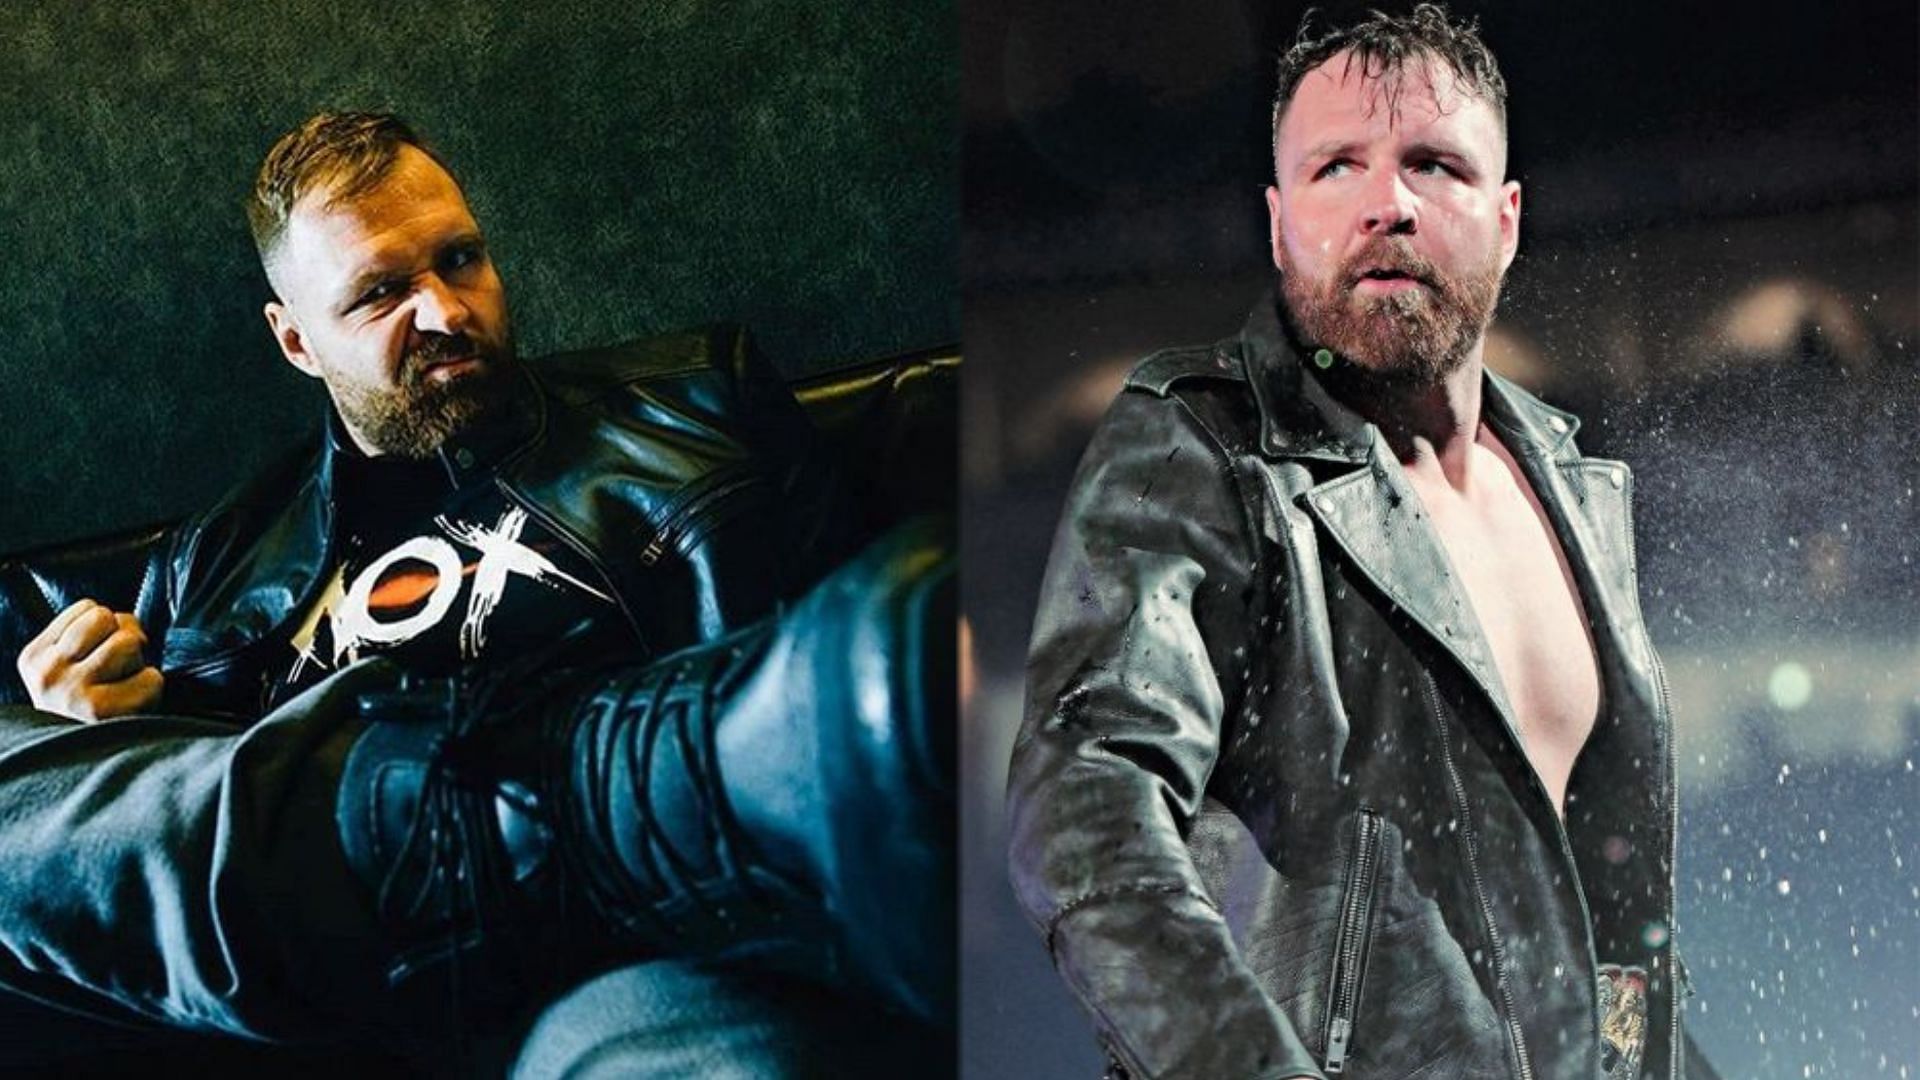 Could Jon Moxley put an end to this decades-old rivalry?